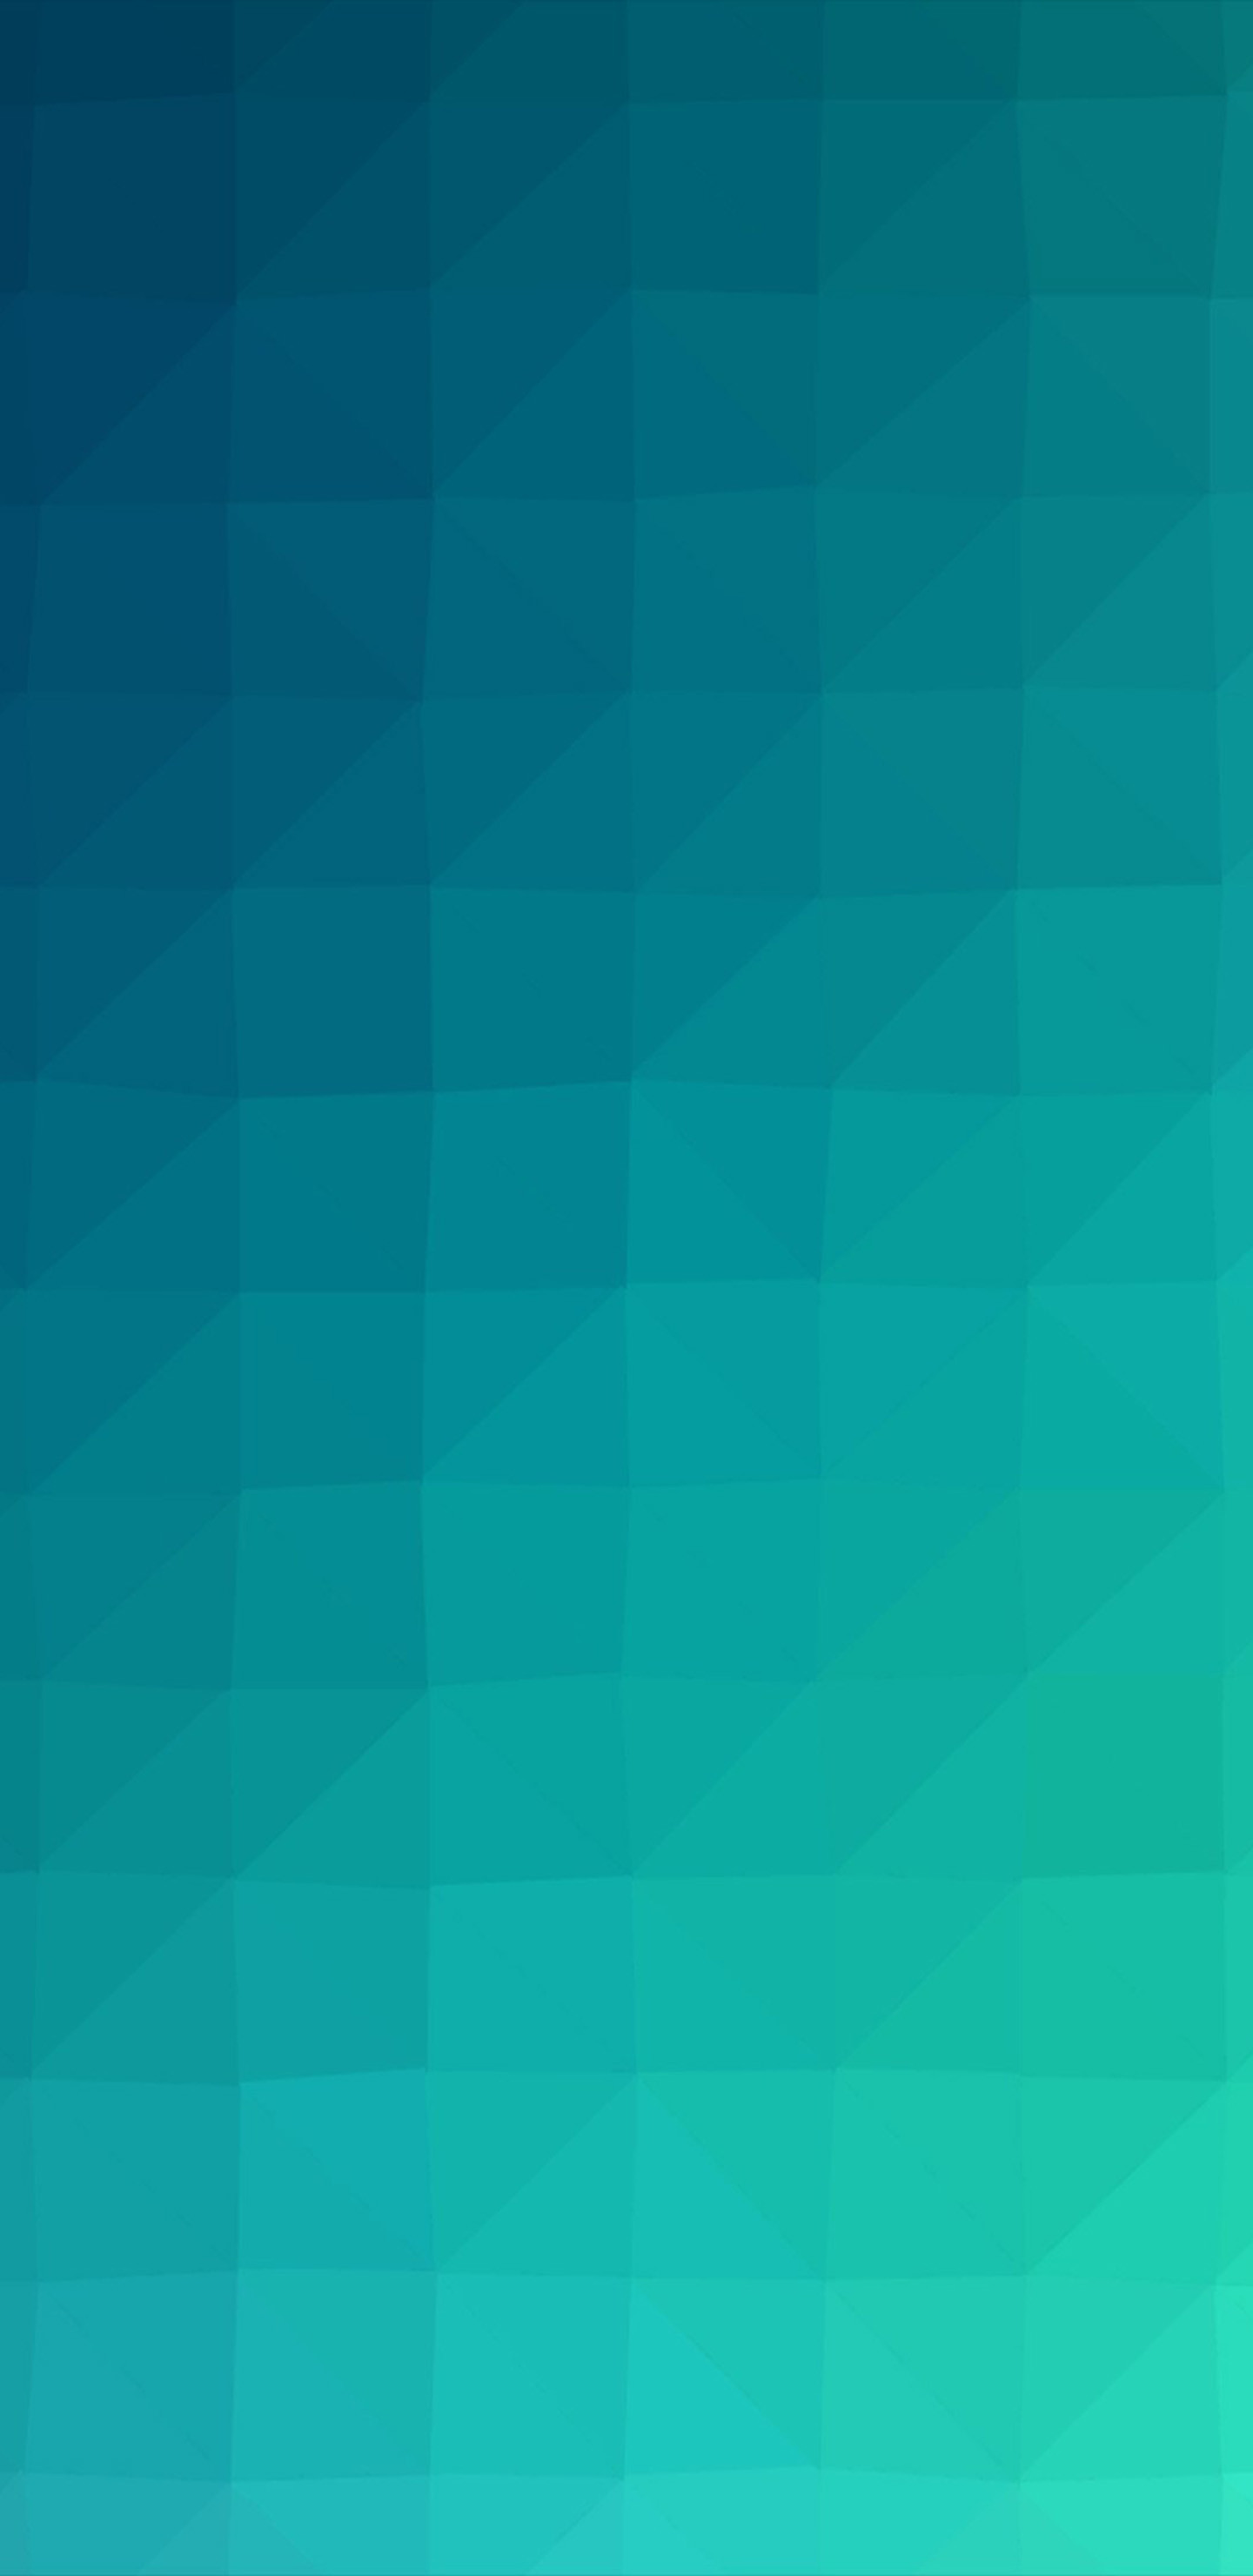 1440x2960 Green and blue polygon abstract pattern Galaxy Note 8 Wallpaper